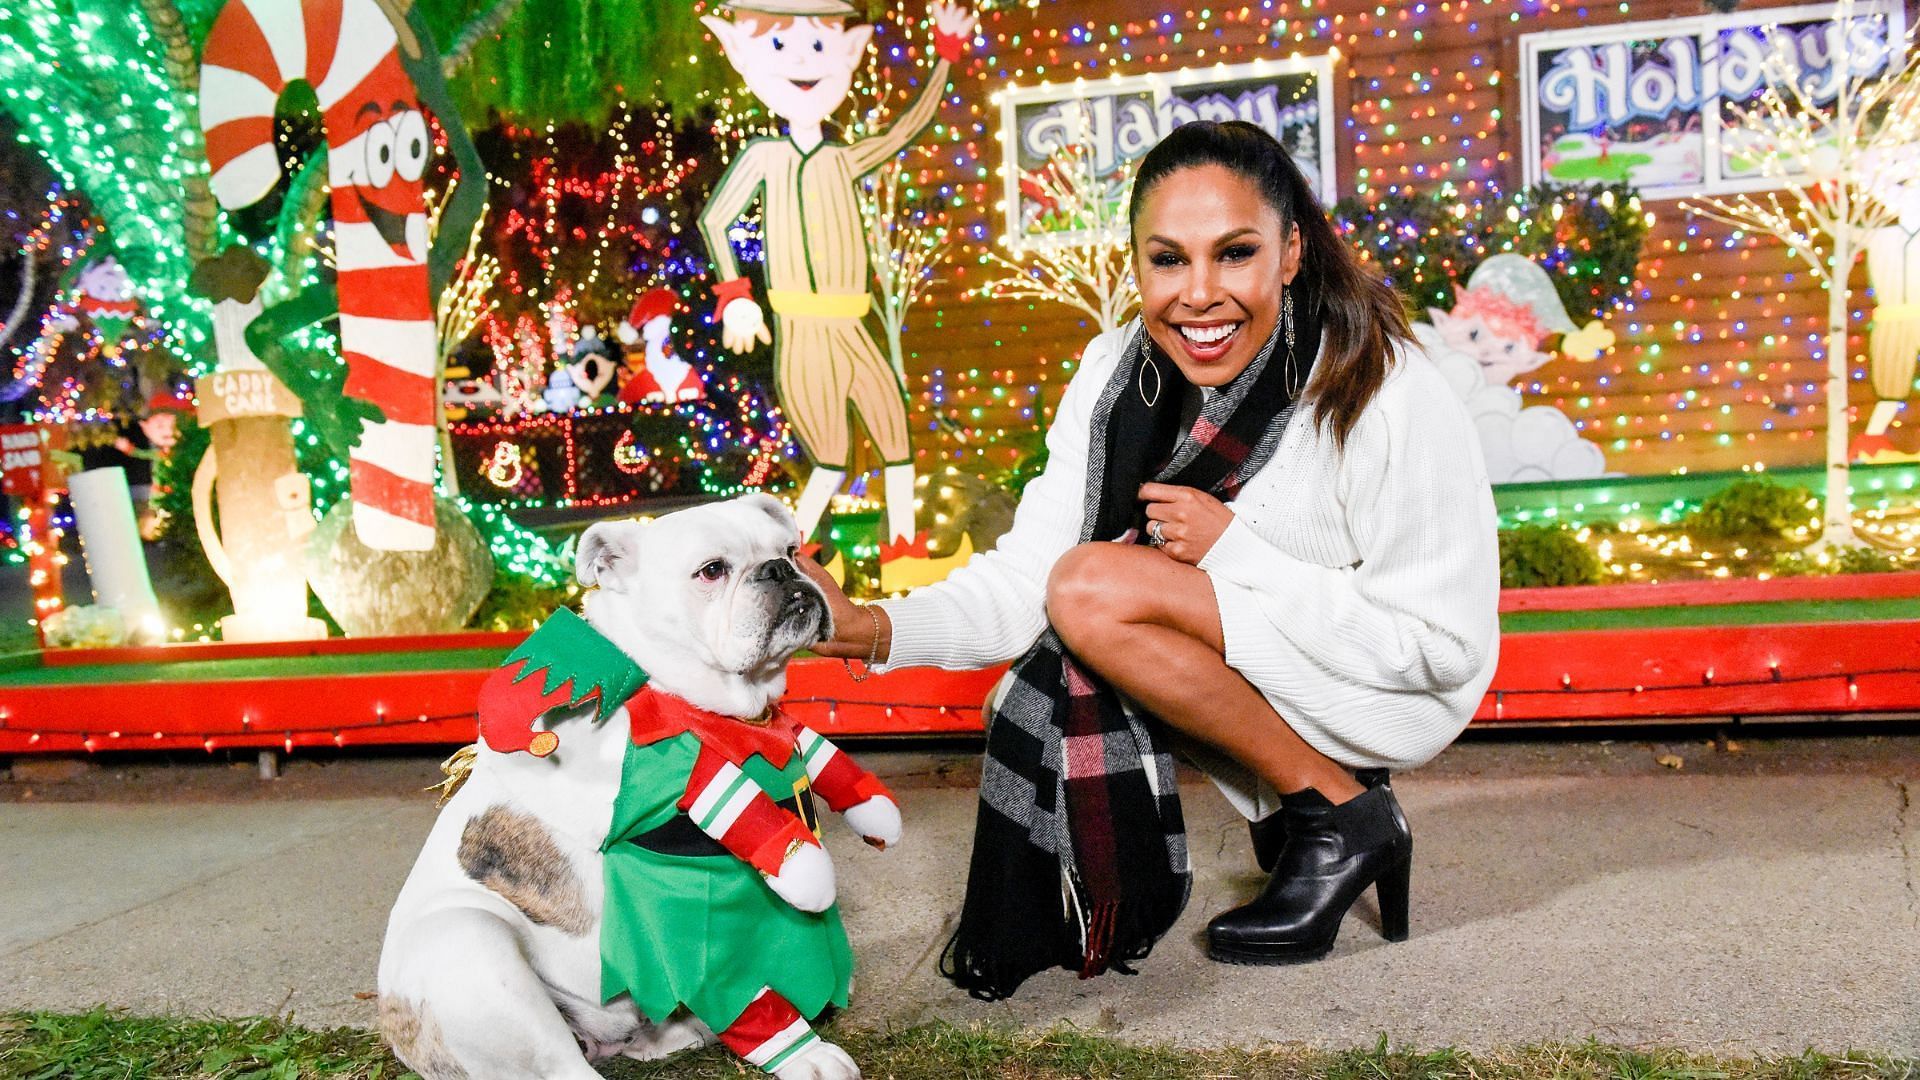 Taniya Nayak to appear as host in The Great Christmas Light Fight